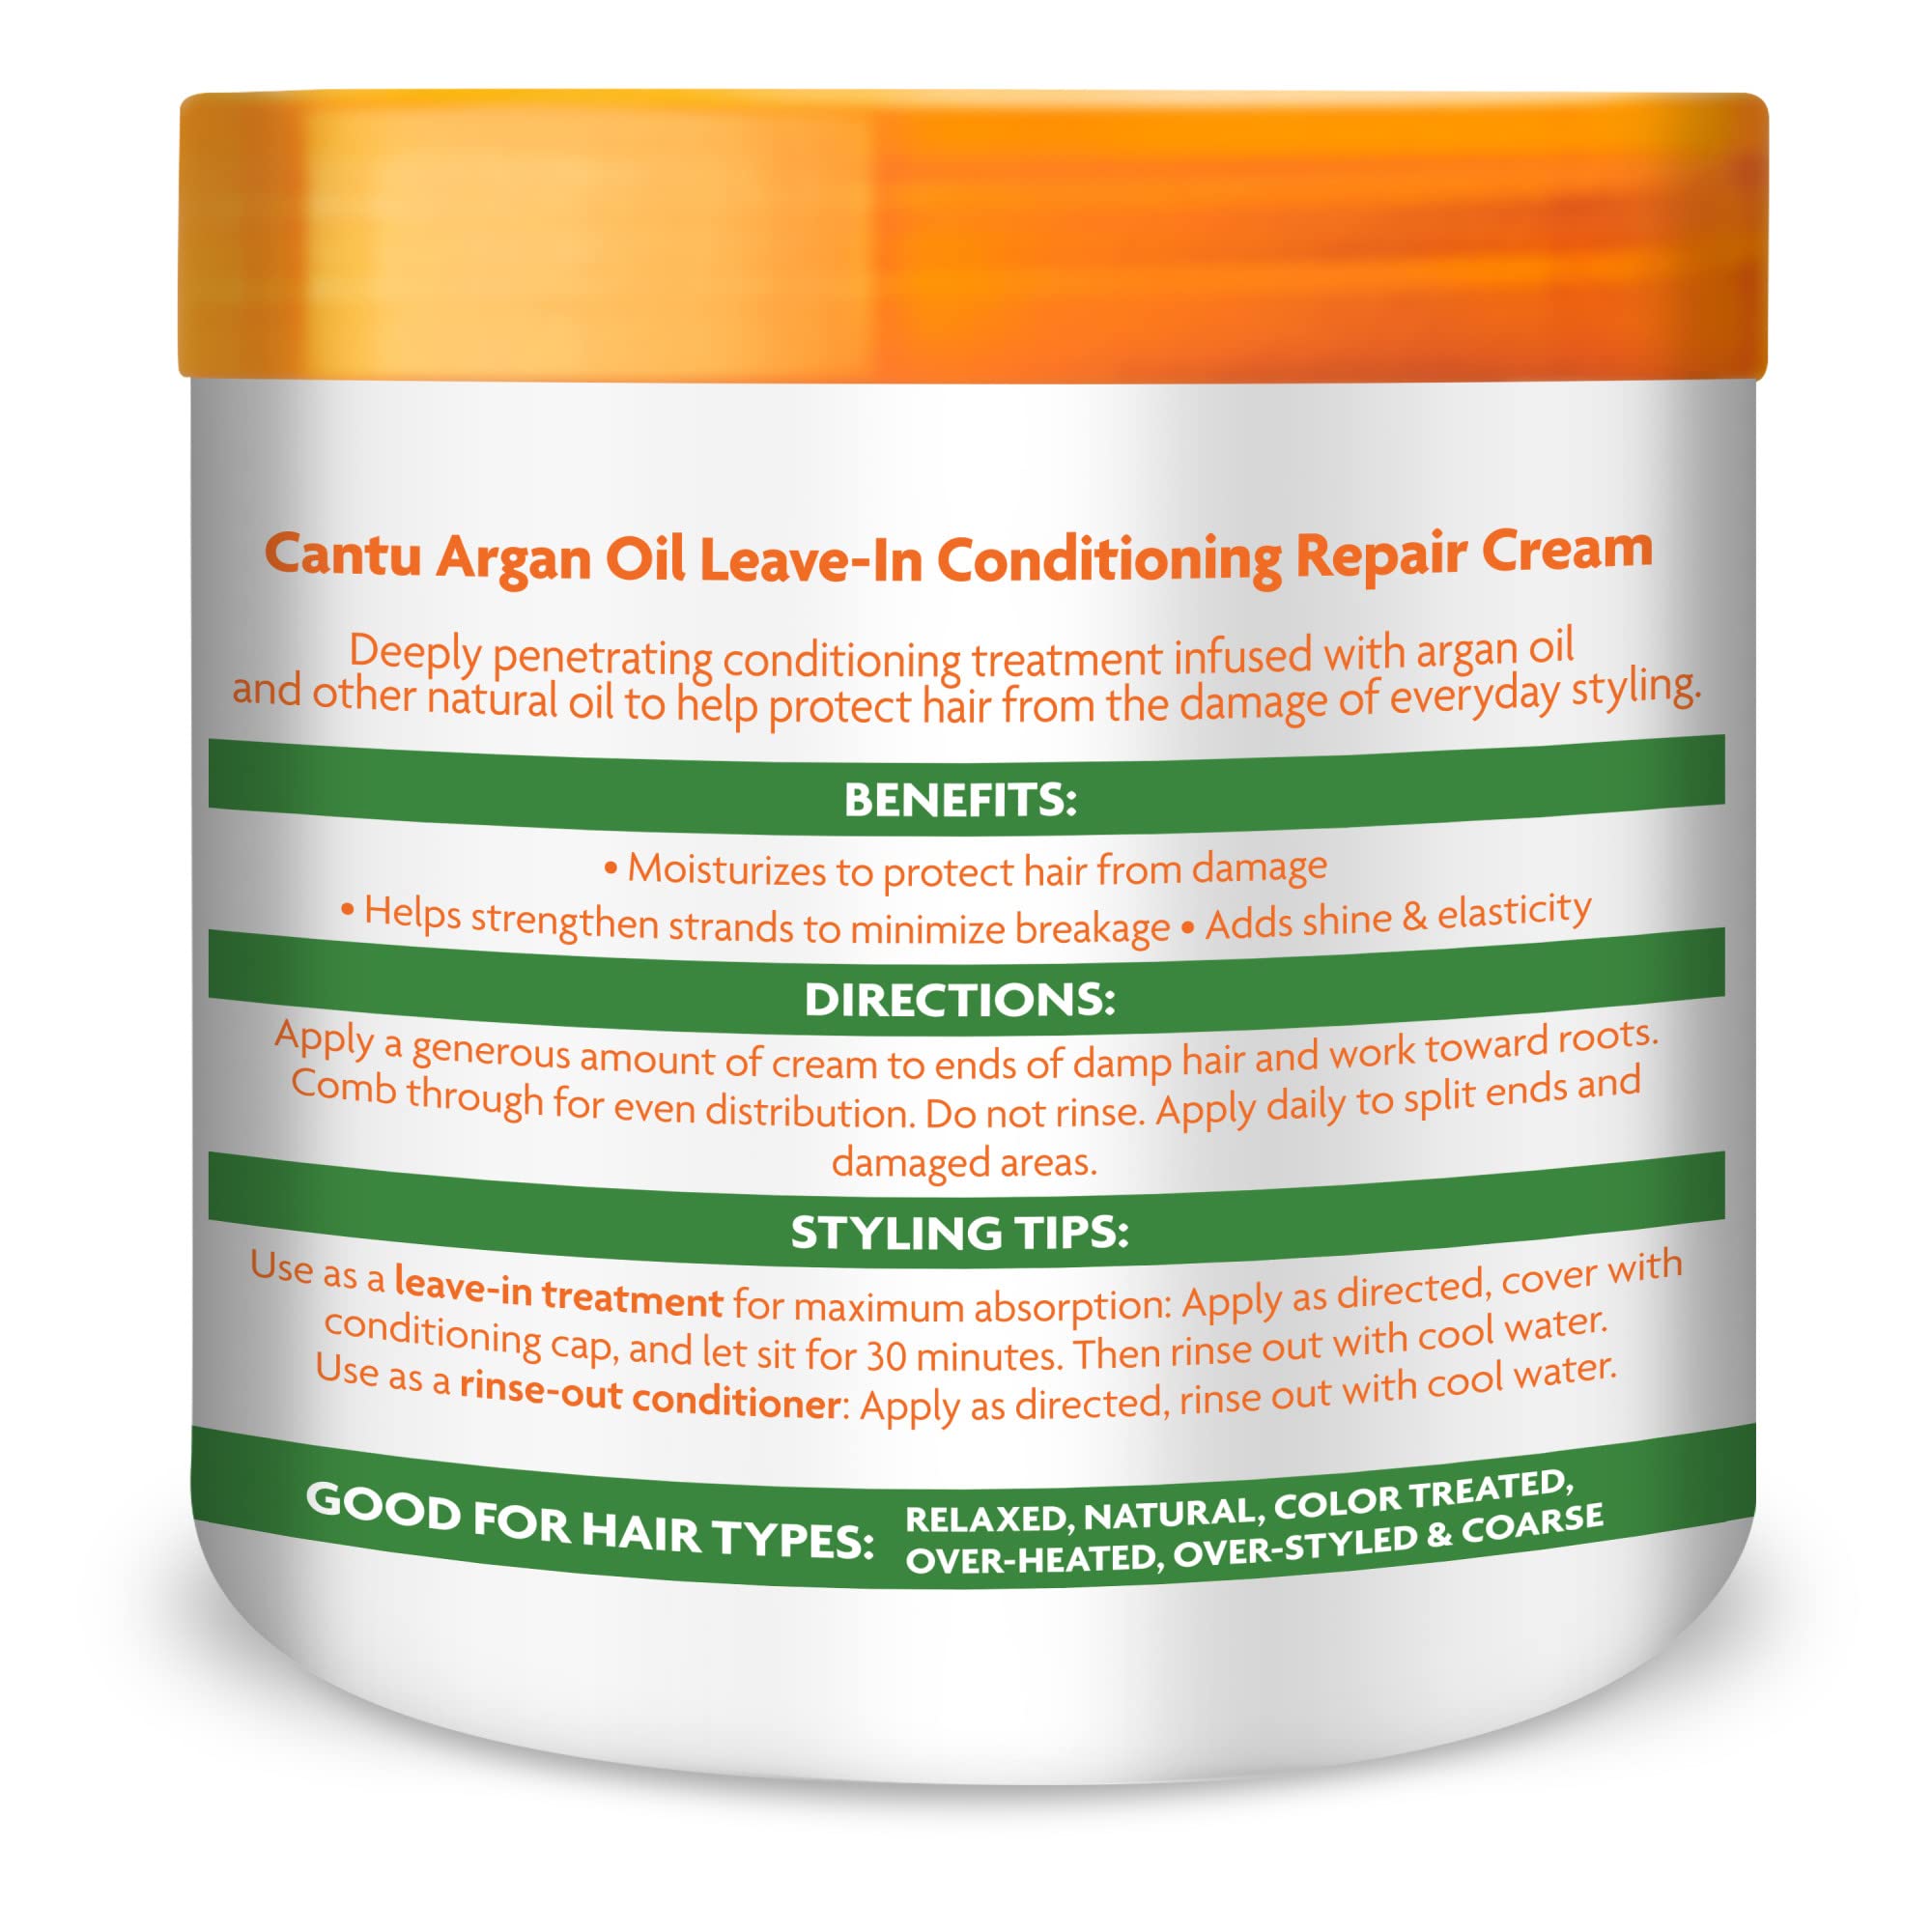 Cantu Leave-In Conditioning Repair Cream with Argan Oil, 16 oz (Pack of 2) (Packaging May Vary)